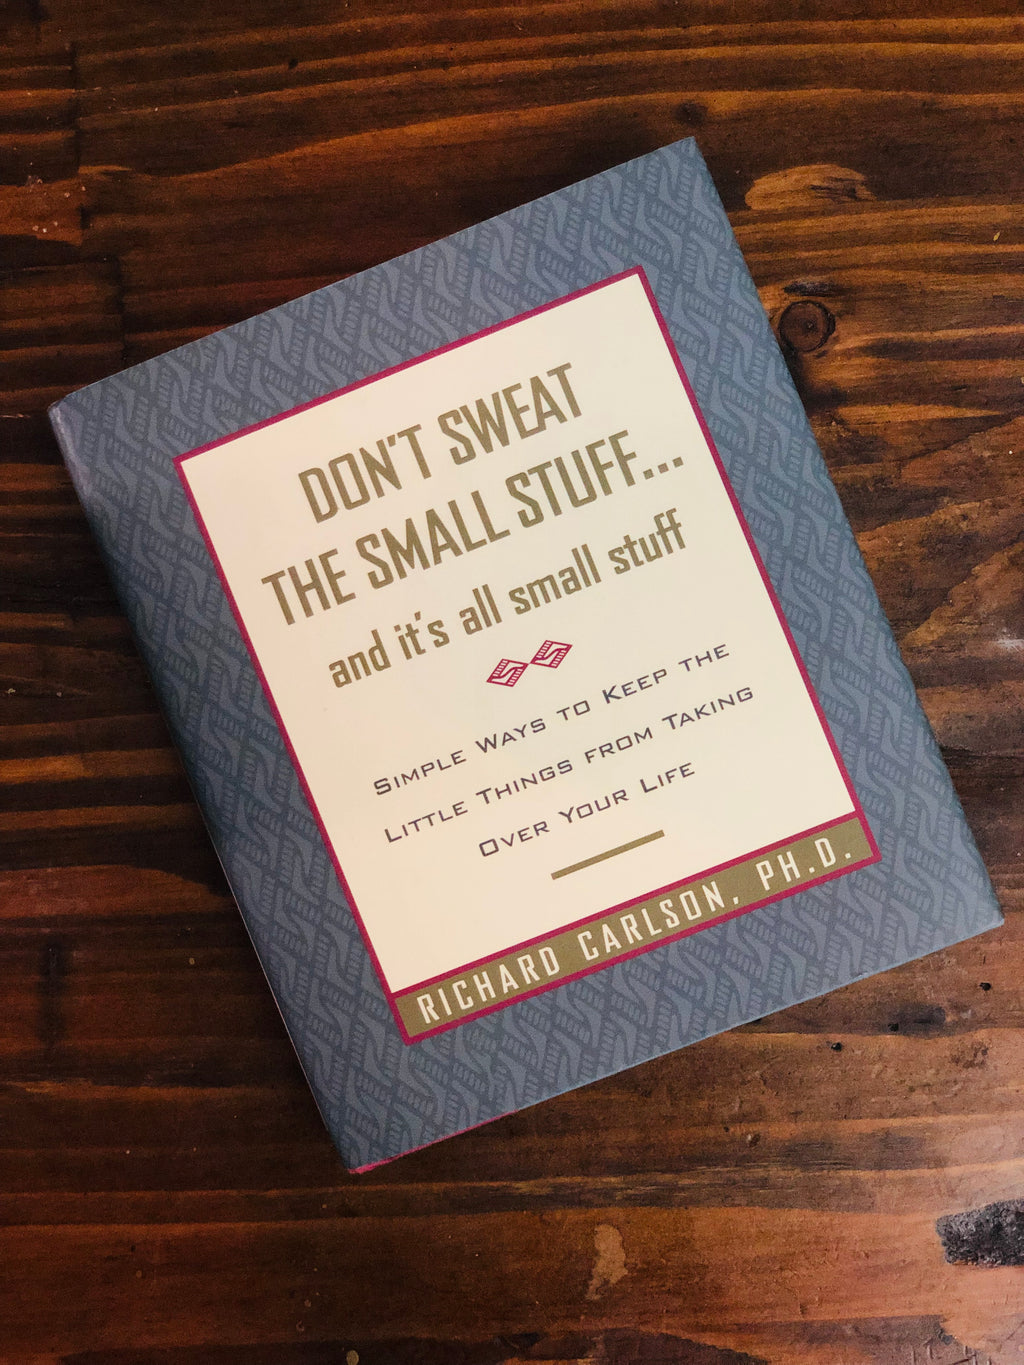 Don't Sweat The Small Stuff... and It's All Small Stuff- By Richard Carlson, PH.D.